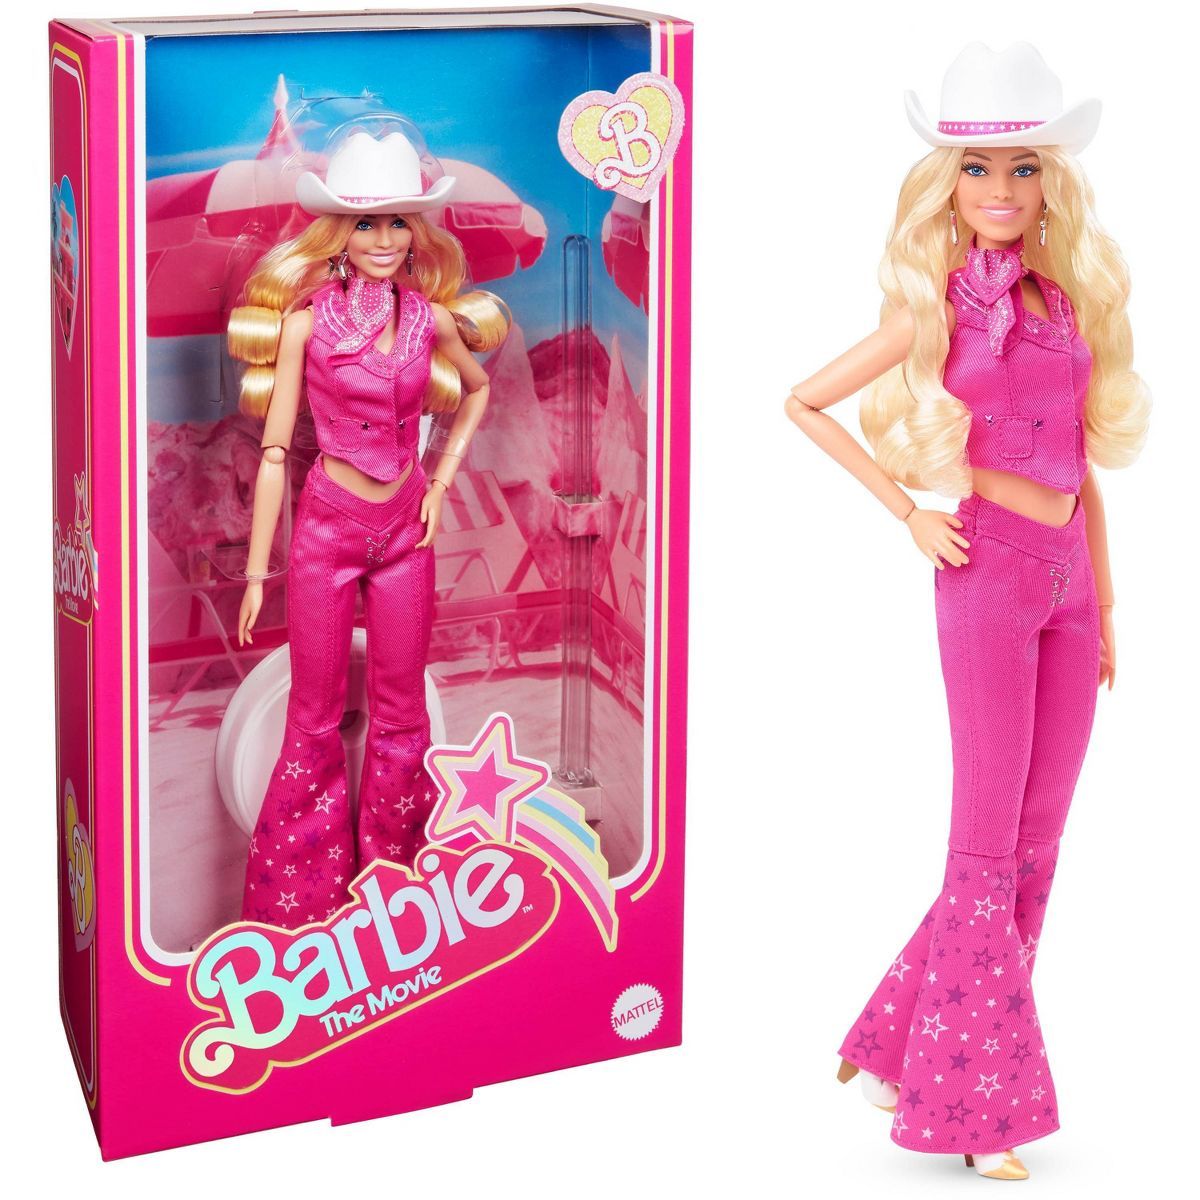 Barbie: The Movie Collectible Doll Margot Robbie as Barbie in Pink Western Outfit | Target